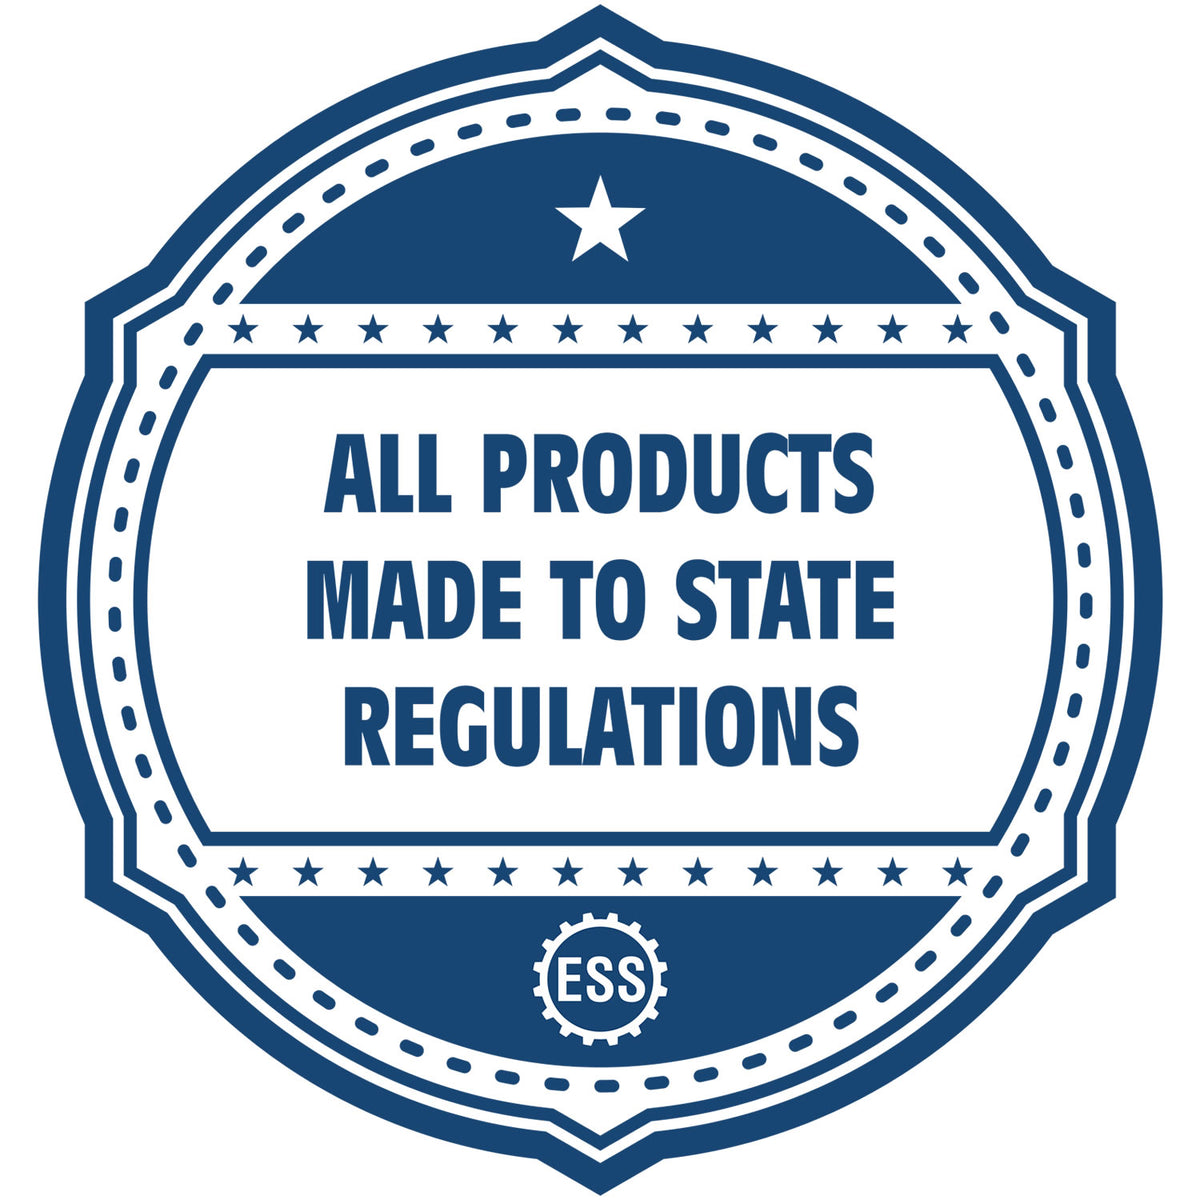 An icon or badge element for the State of Maine Architectural Seal Embosser showing that this product is made in compliance with state regulations.